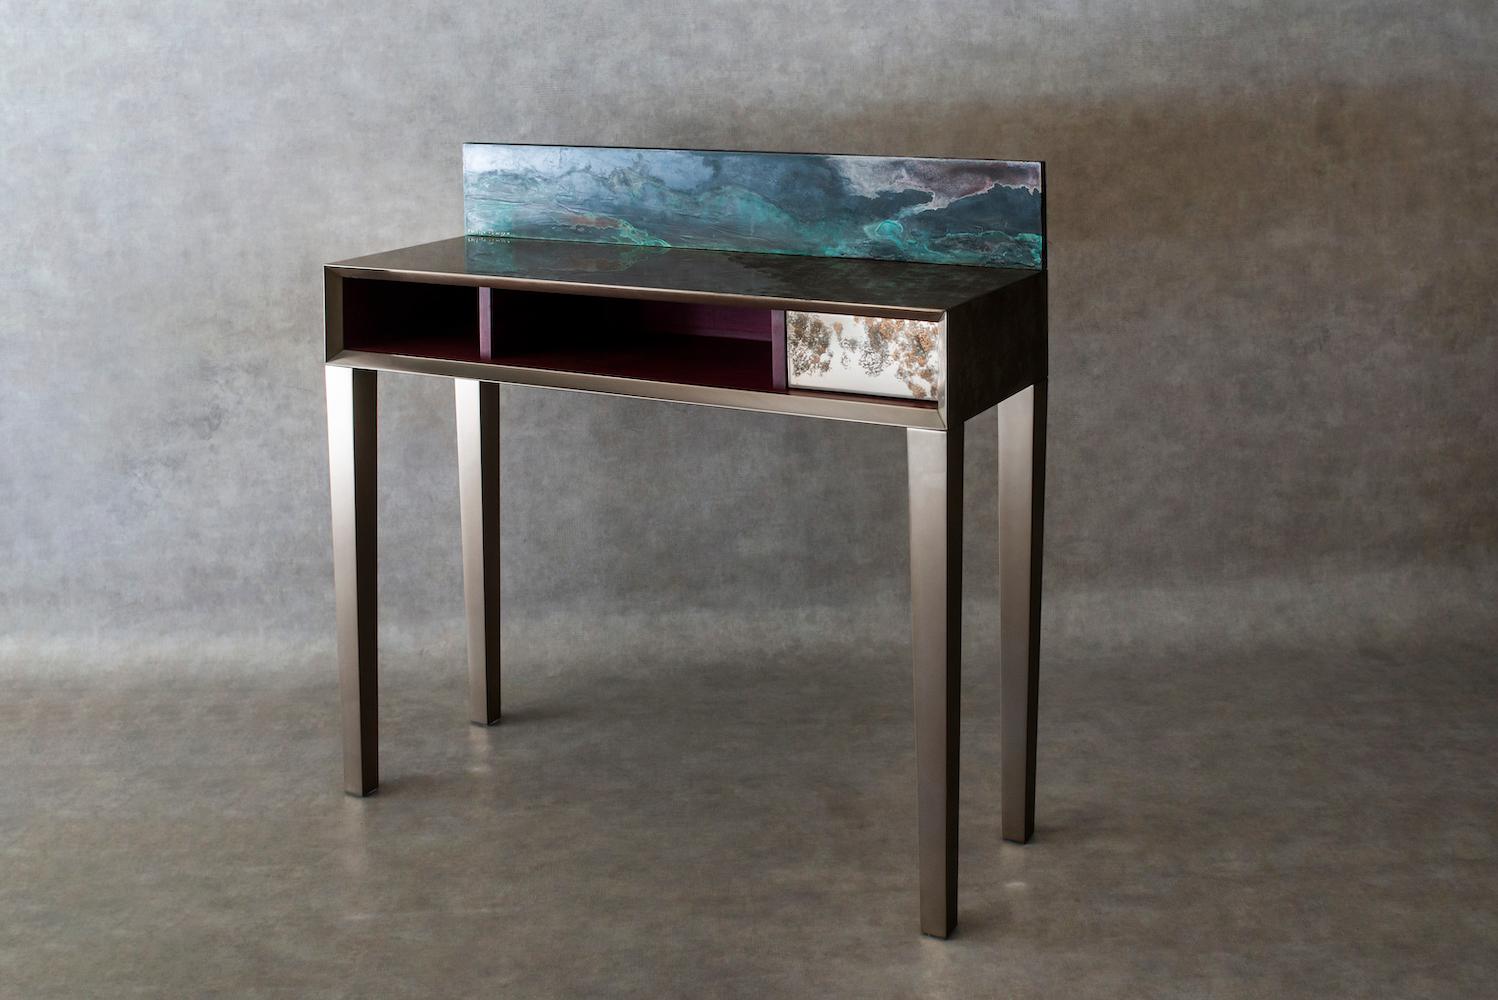 This writing desk is fully clad in titanium, except for the storage space whose two small compartments are crafted from amaranth, a precious hardwood known for its purple hue. A removable top makes it easy to switch up the decor: the flip side is a